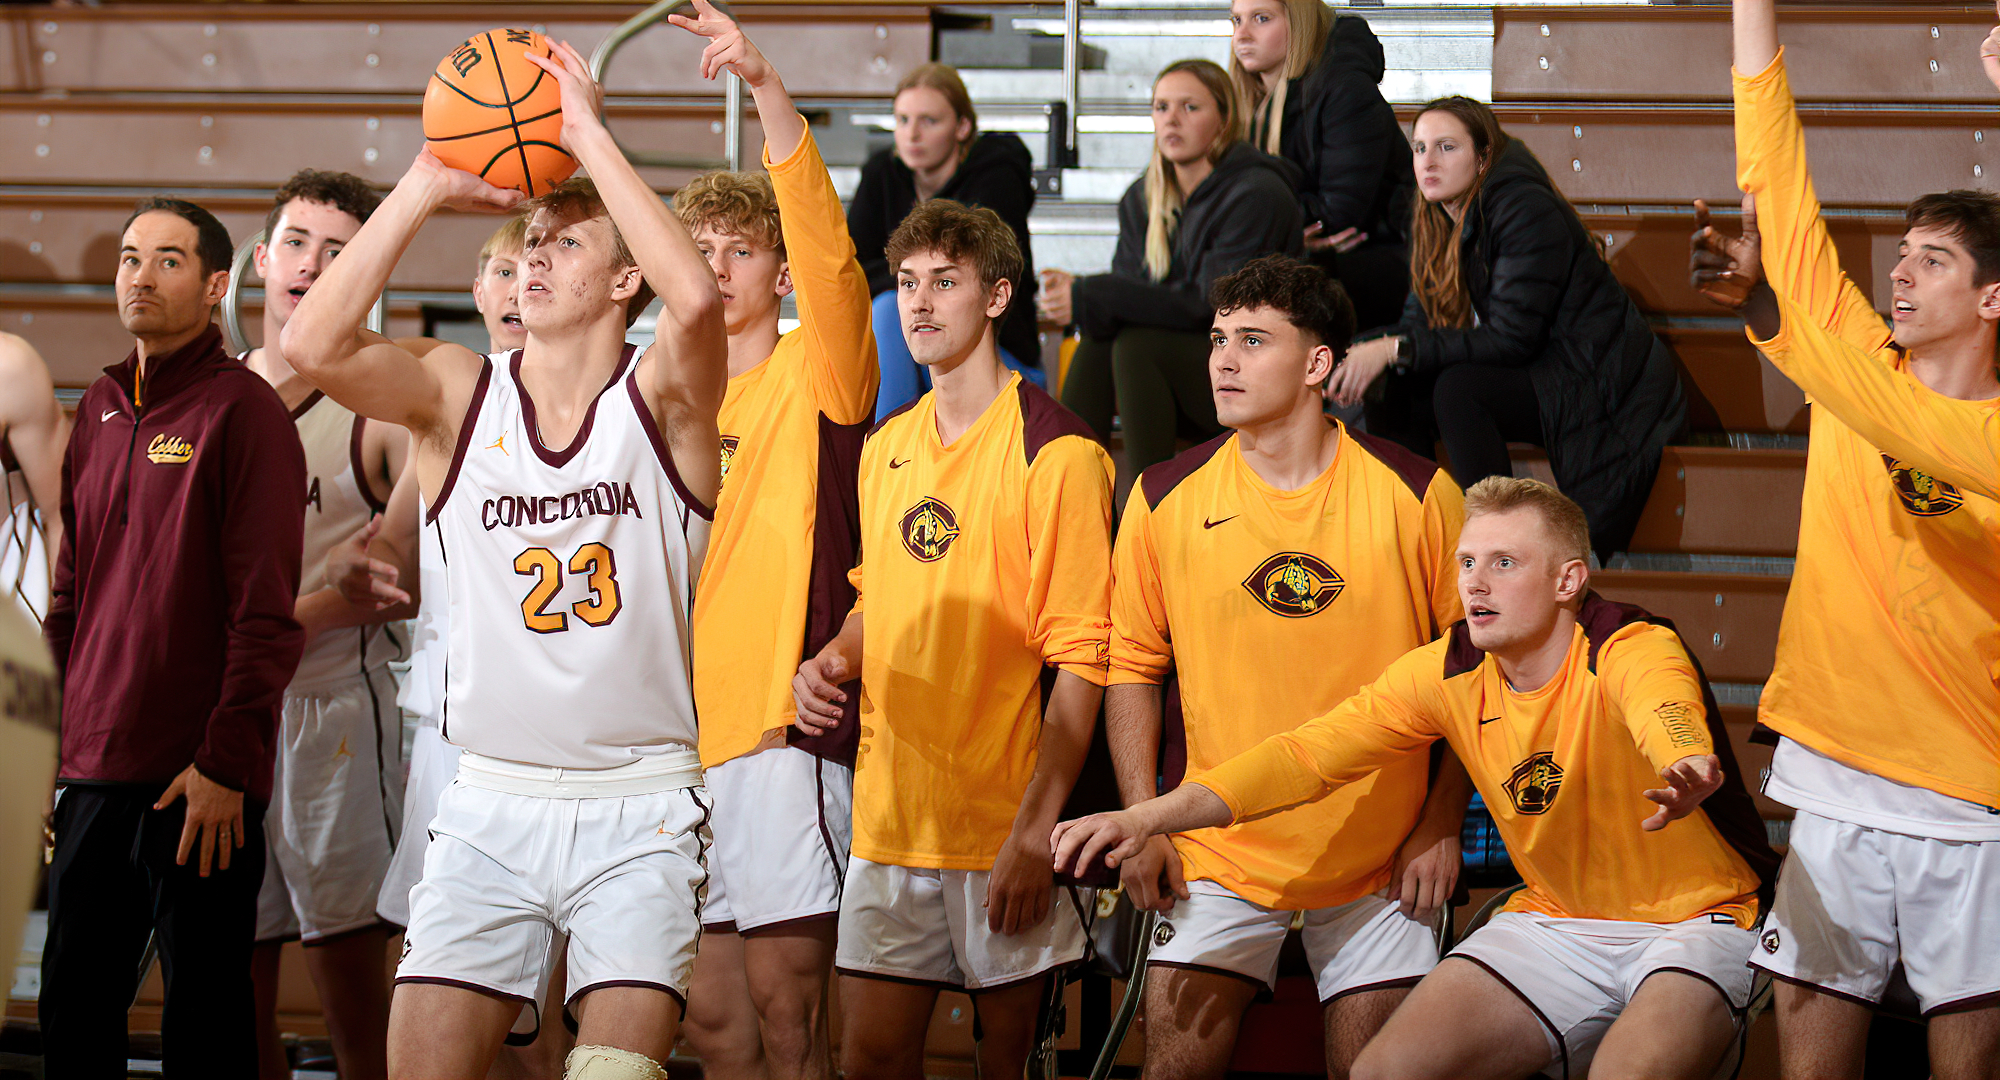 Dylan Inniger grabbed a game-high eight rebounds and had 11 points in the Cobbers' win at Martin Luther. CC had 12 players score in the game.